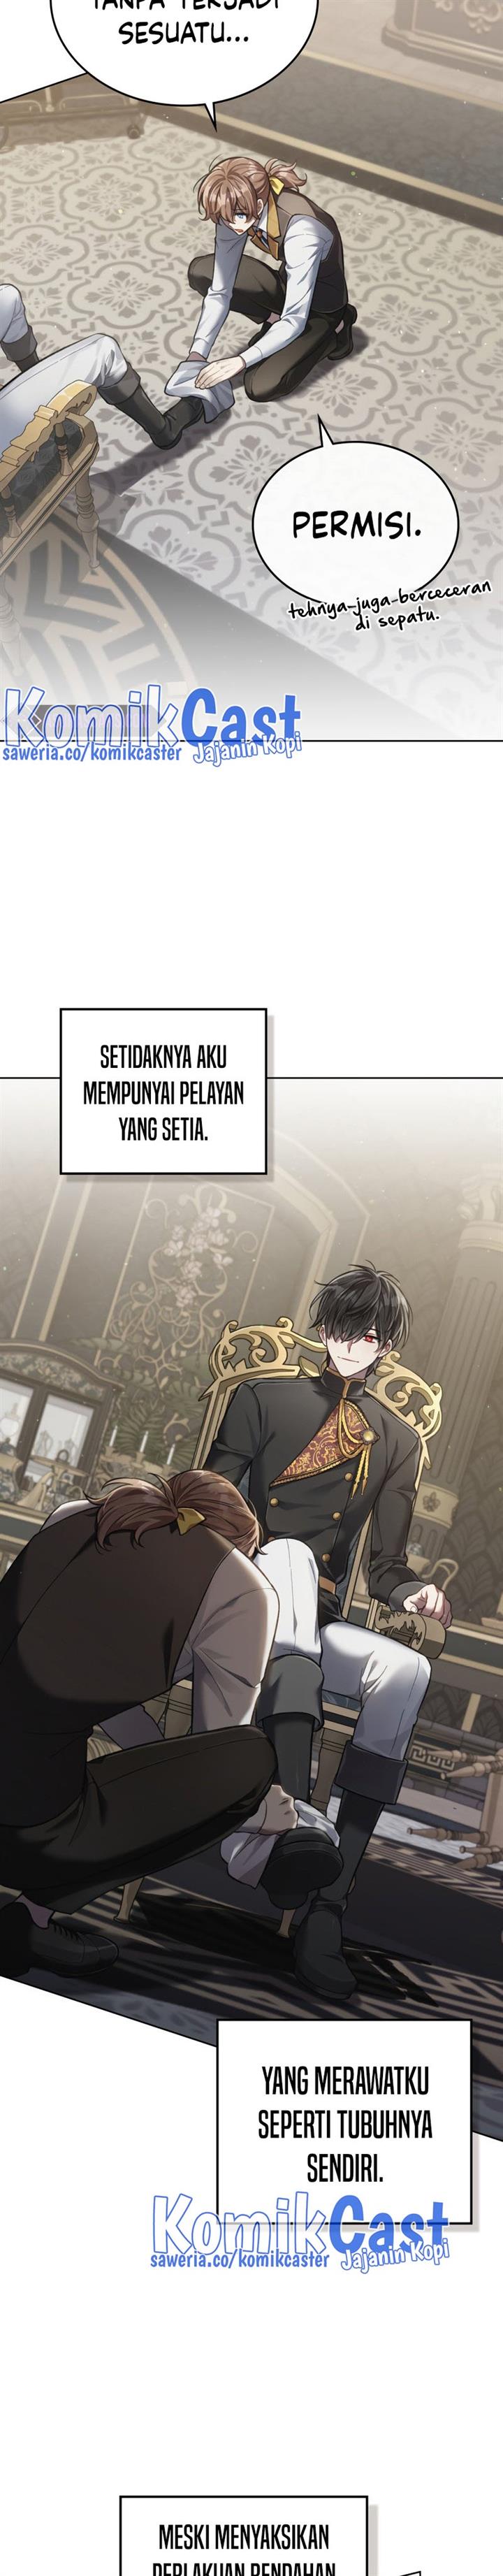 Reborn As The Enemy Prince Chapter 3